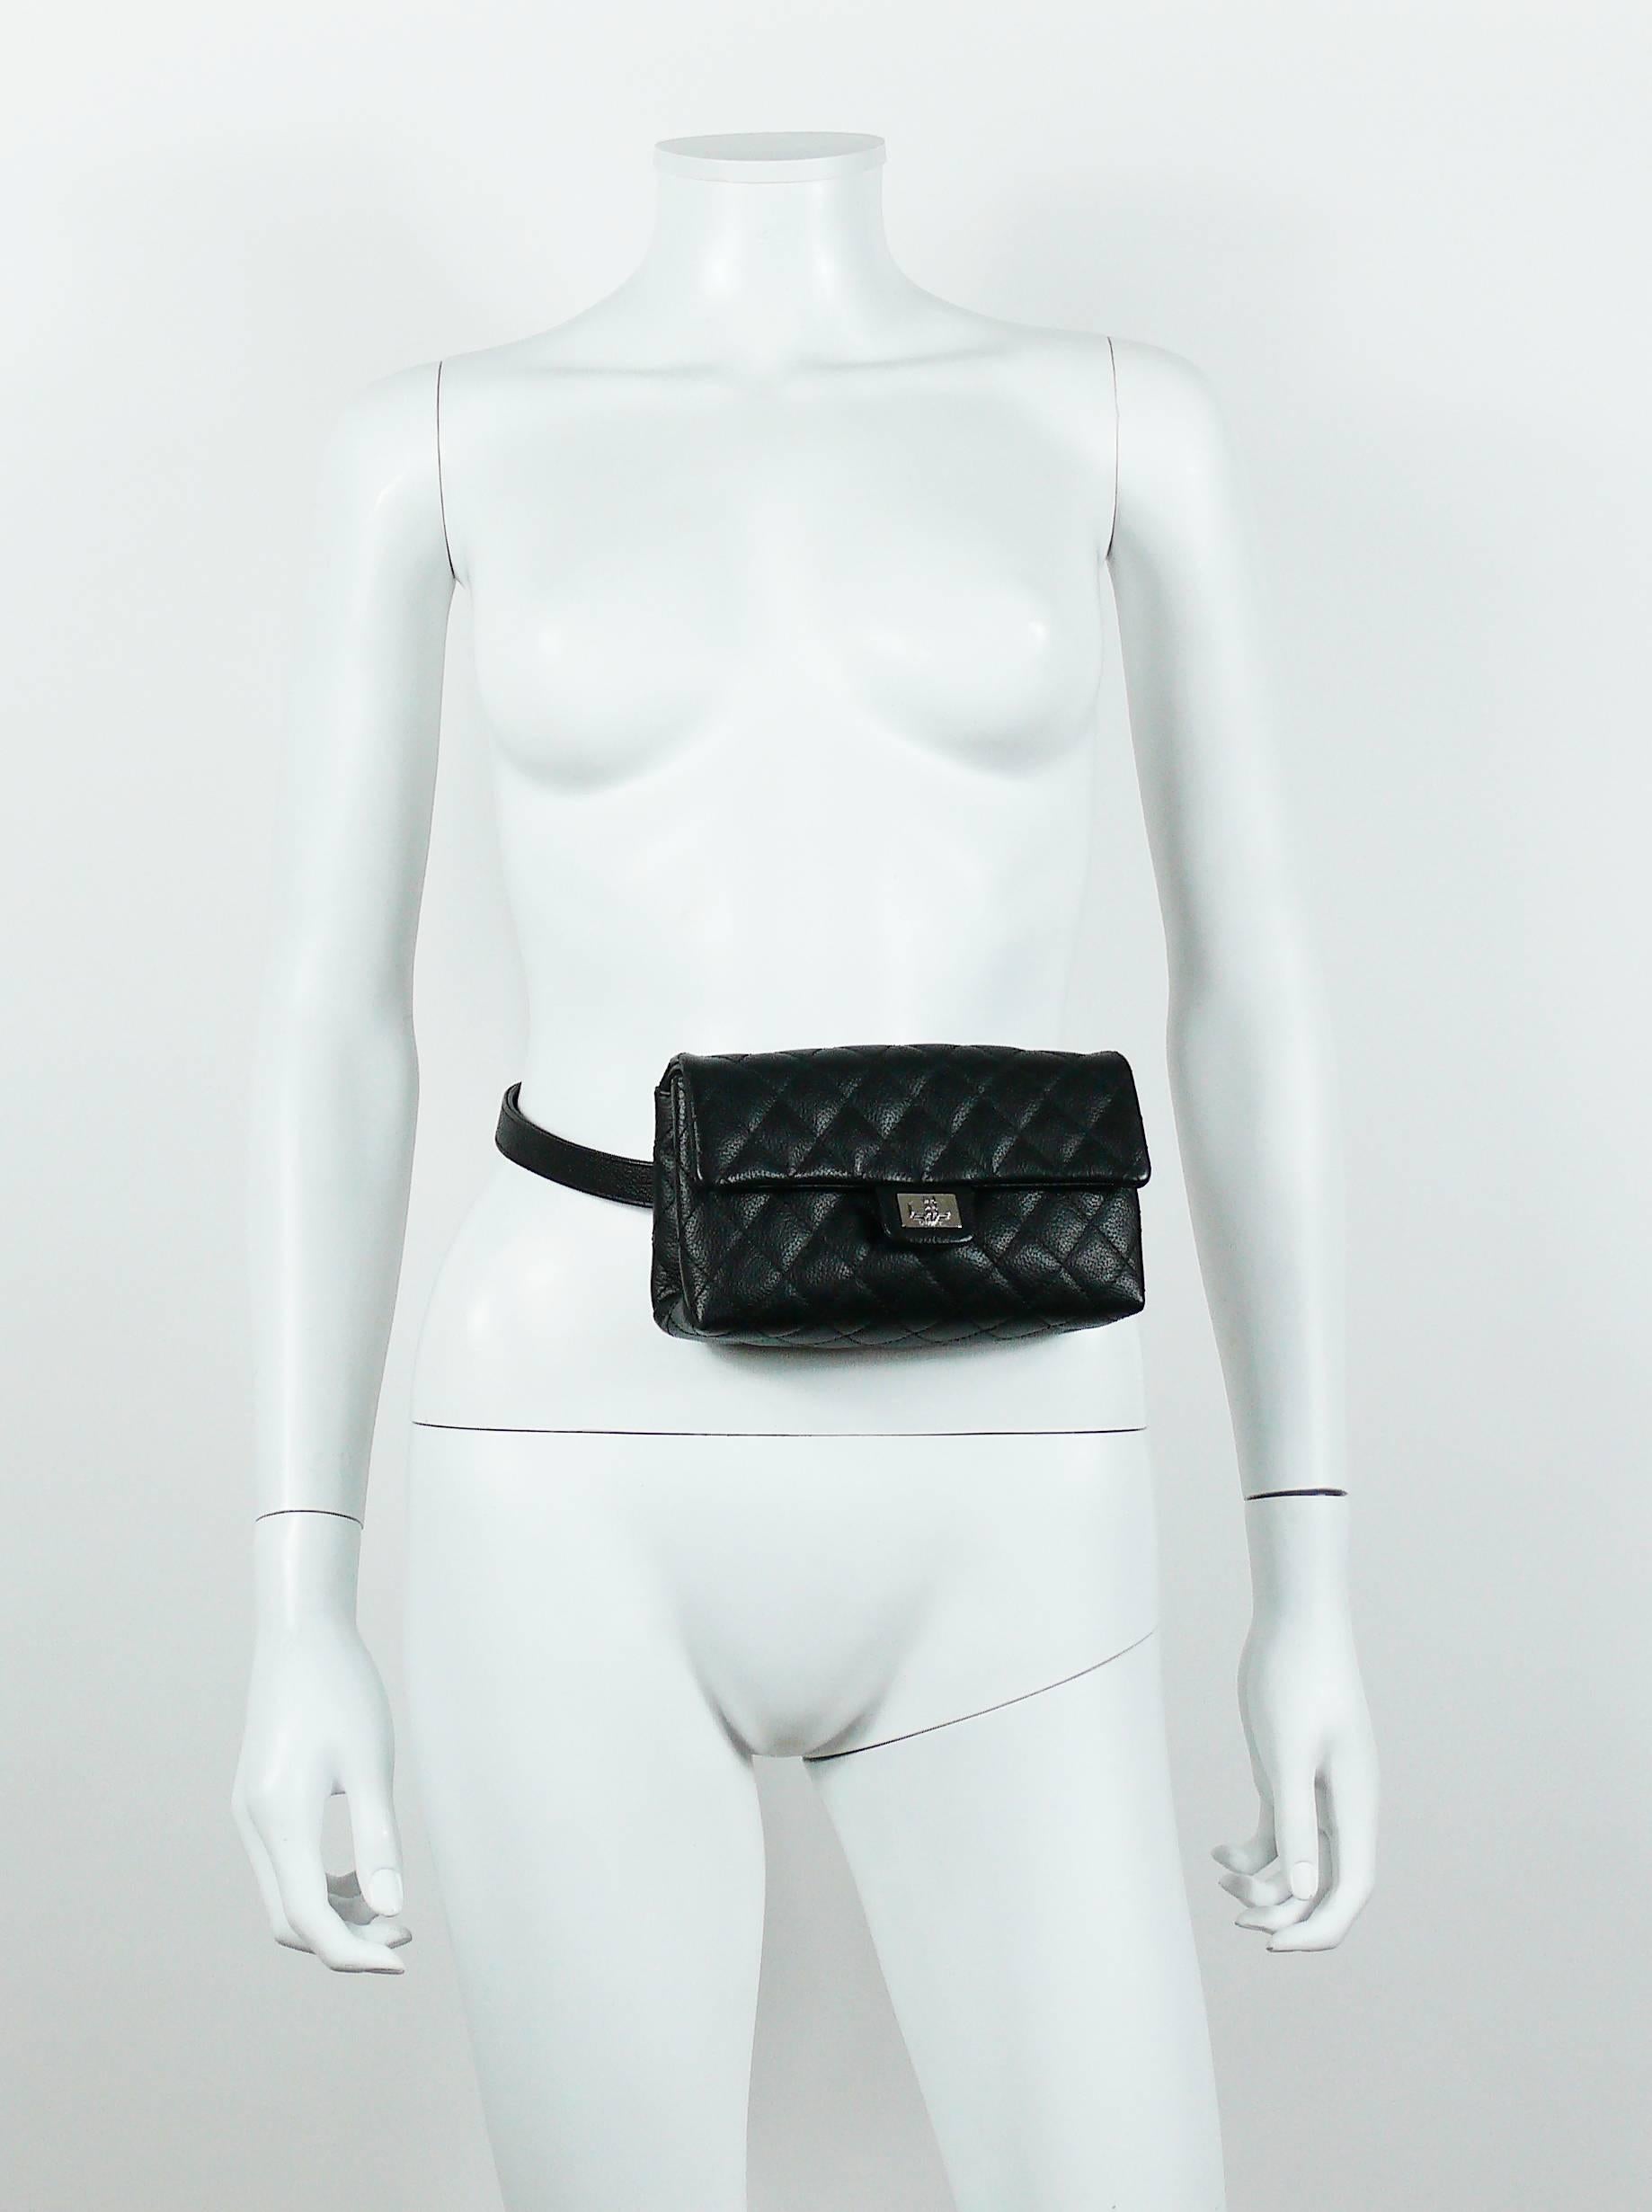 CHANEL UNIFORM black quilted grained leather waist-belt bag.

Please note this item was original part of a CHANEL uniform.

This waist bag features :
- Flap top with magnetic snap closure embossed CHANEL.
- Waist belt strap with buckle closure